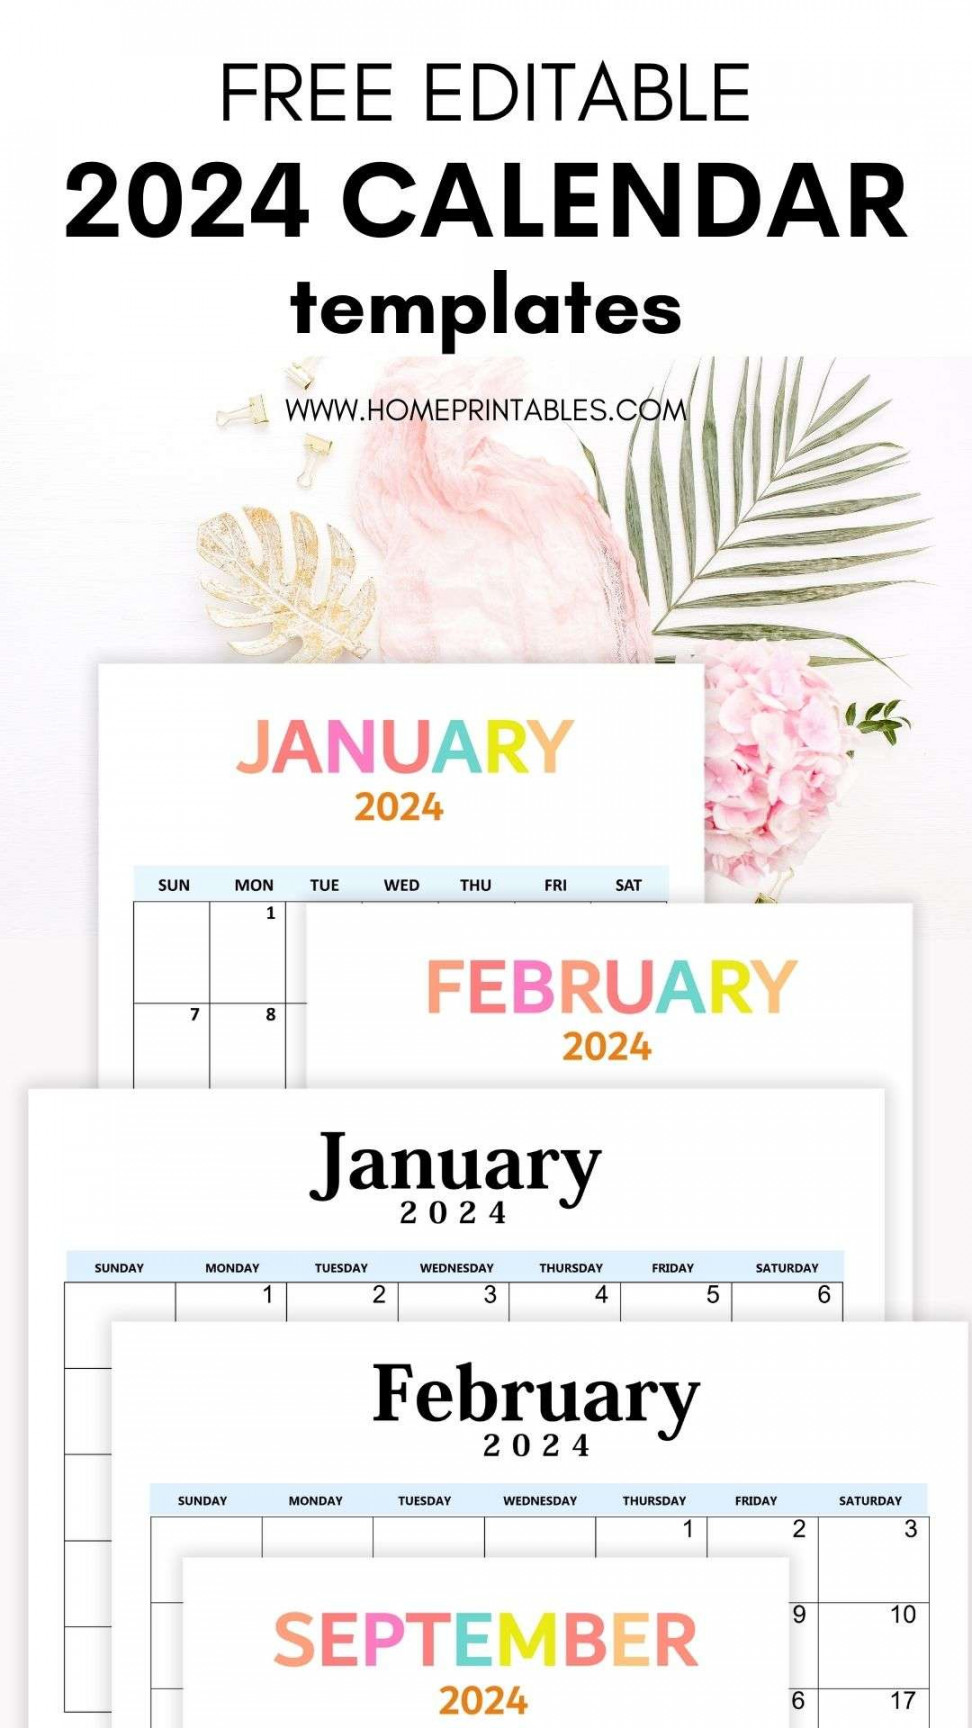 Editable Calendar in Word Template - Free Instant Download!